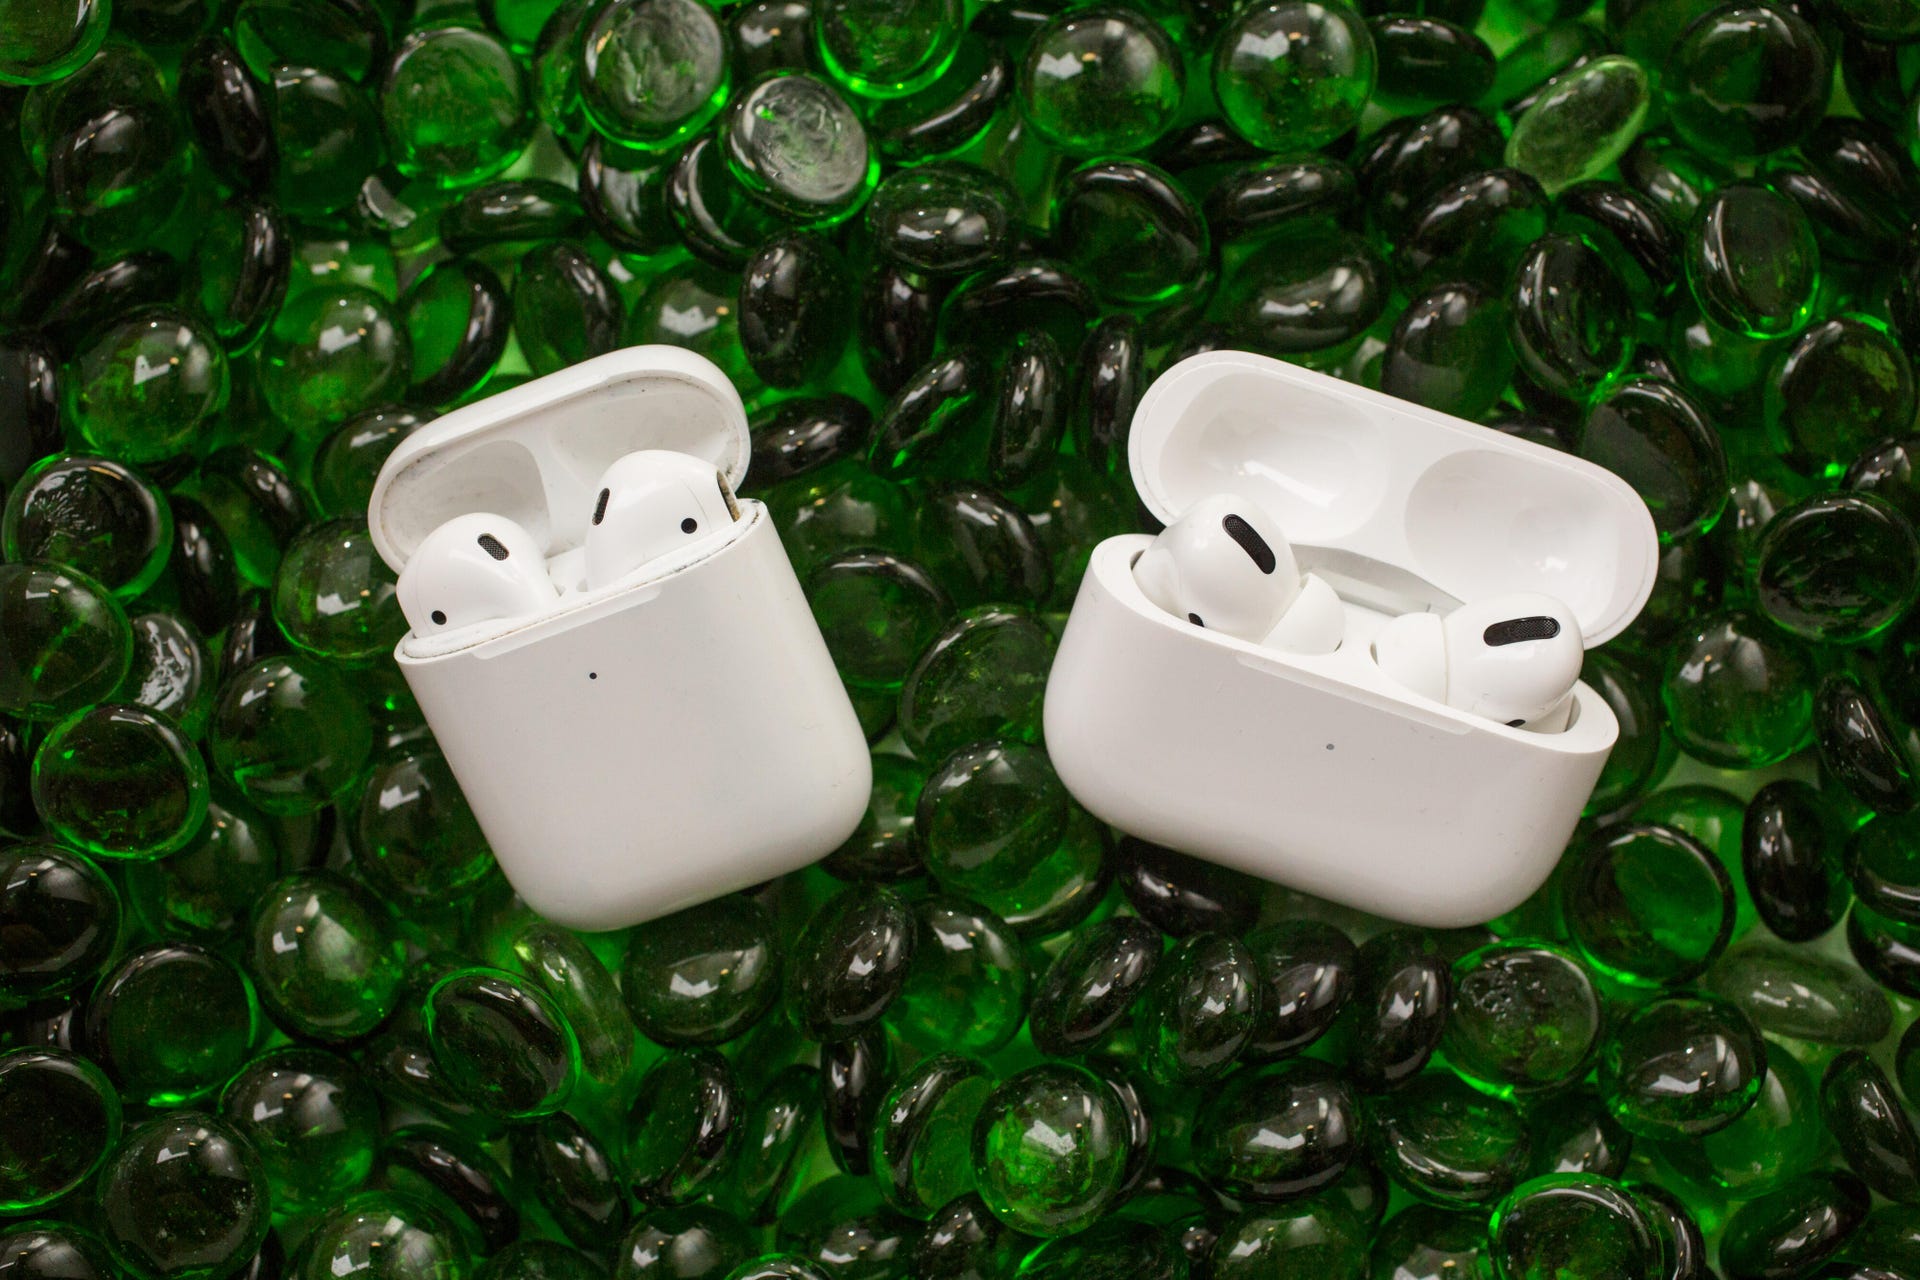 AirPods Pro 1 year later: These wireless earbuds hold up long-term - CNET